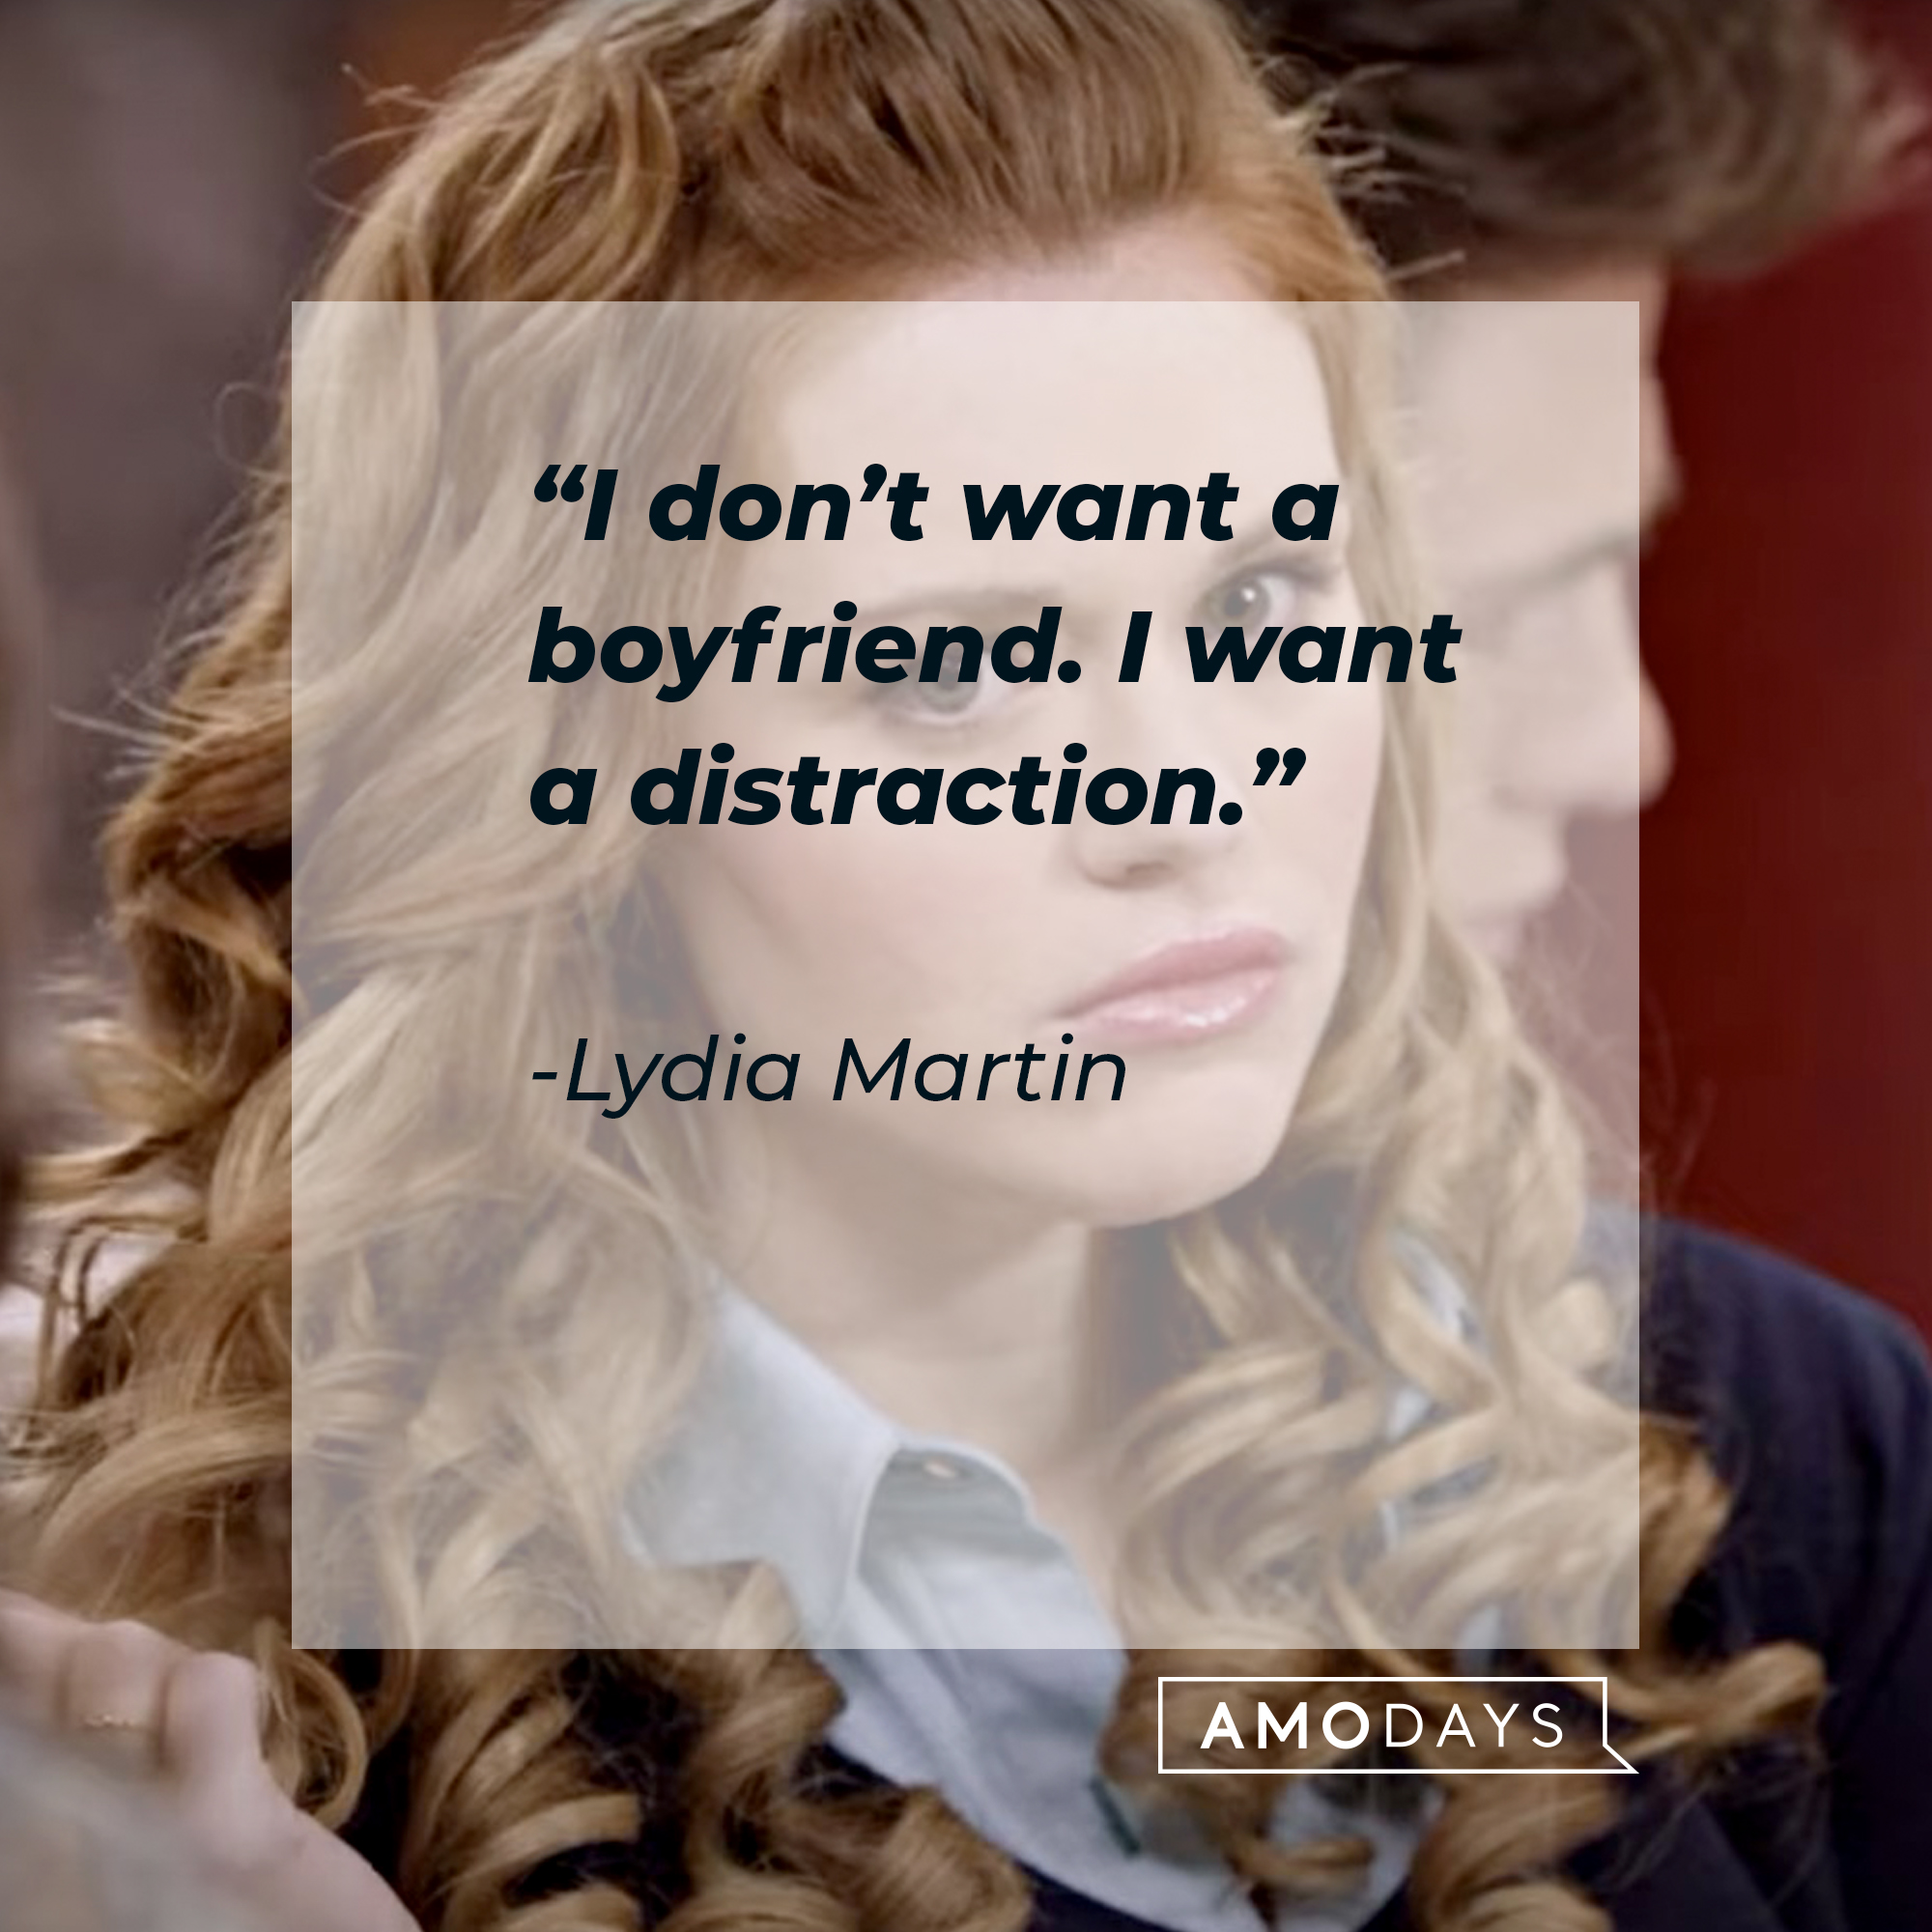 Lydia Martin with her quote: “I don’t want a boyfriend. I want  a distraction.” | Source: facebook.com/TeenWolf